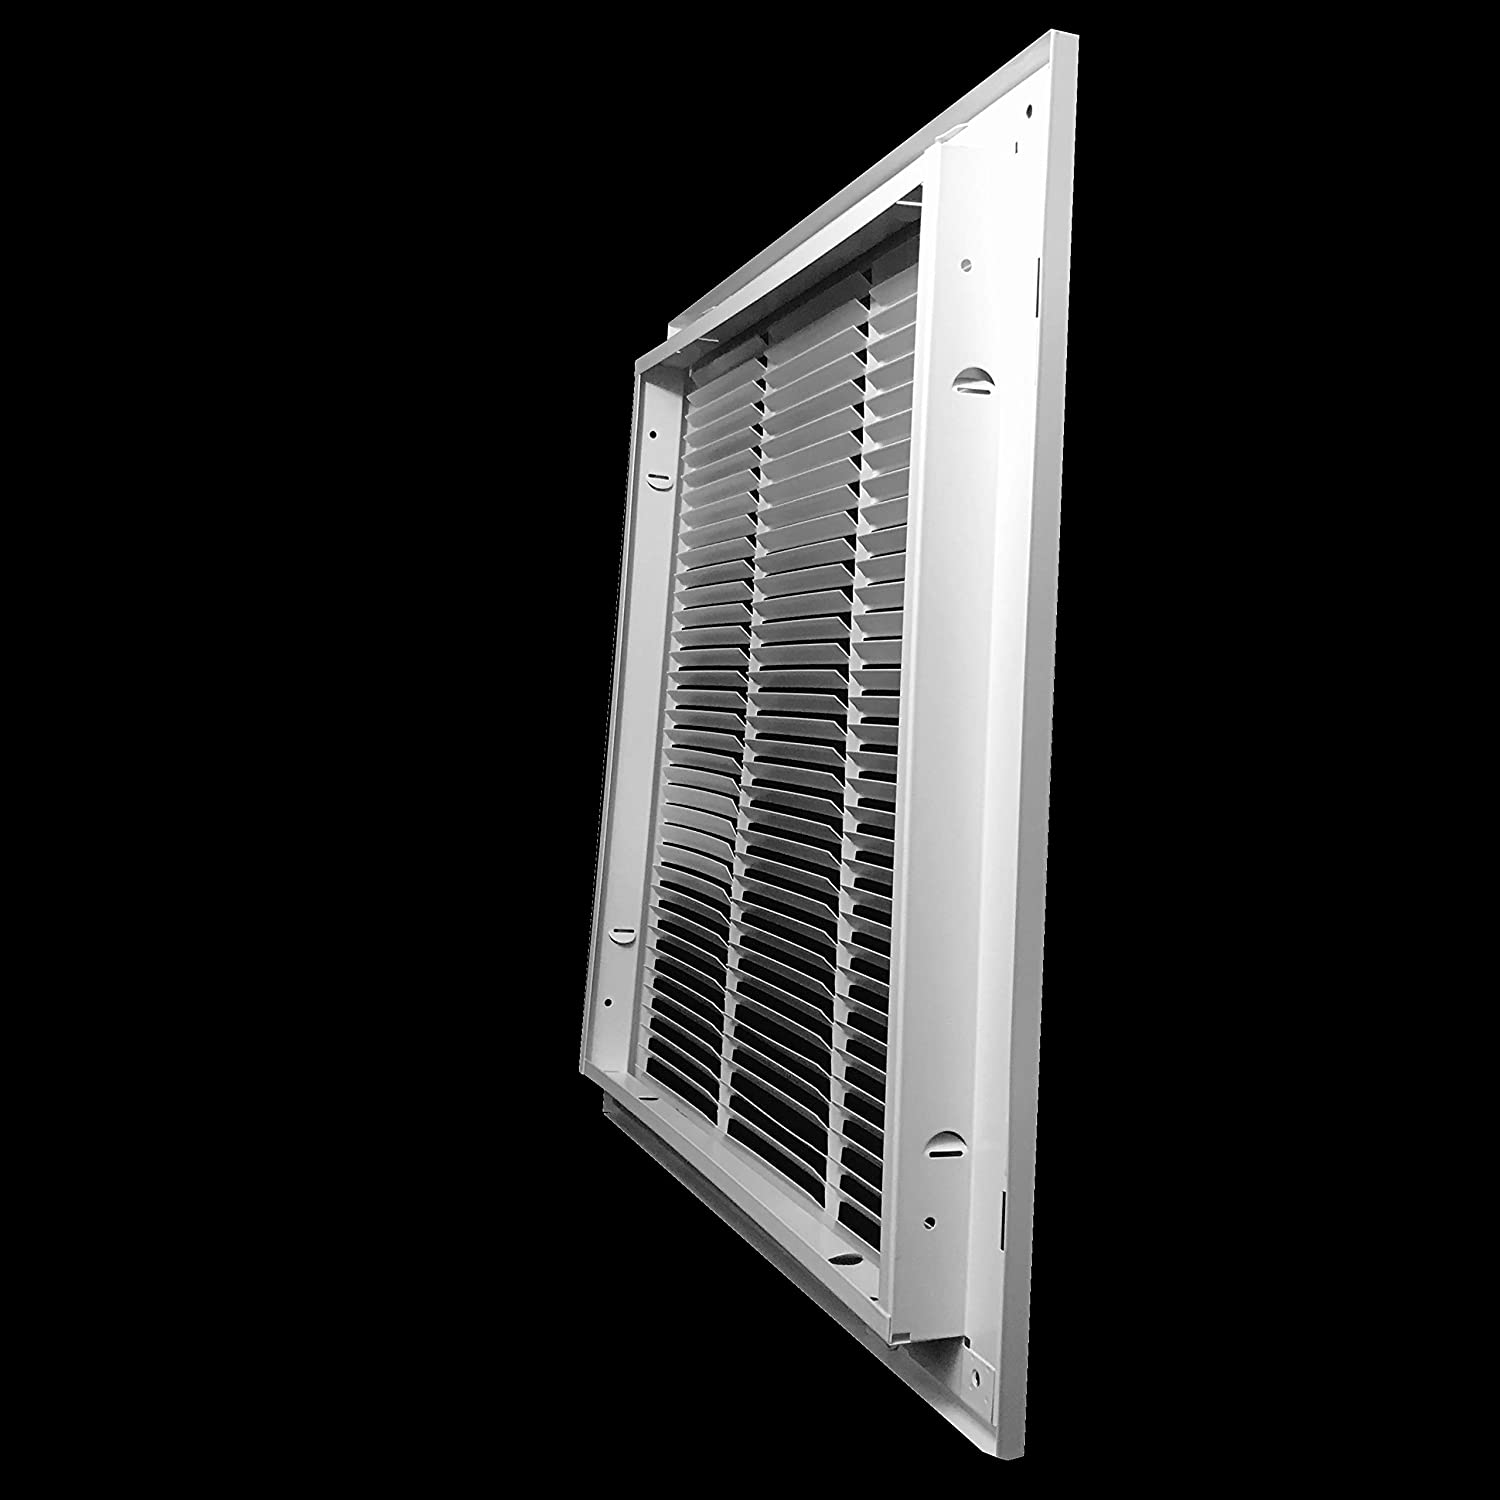 30" X 20" Duct Opening | Filter Included HD Steel Return Air Filter Grille for Sidewall and Ceiling